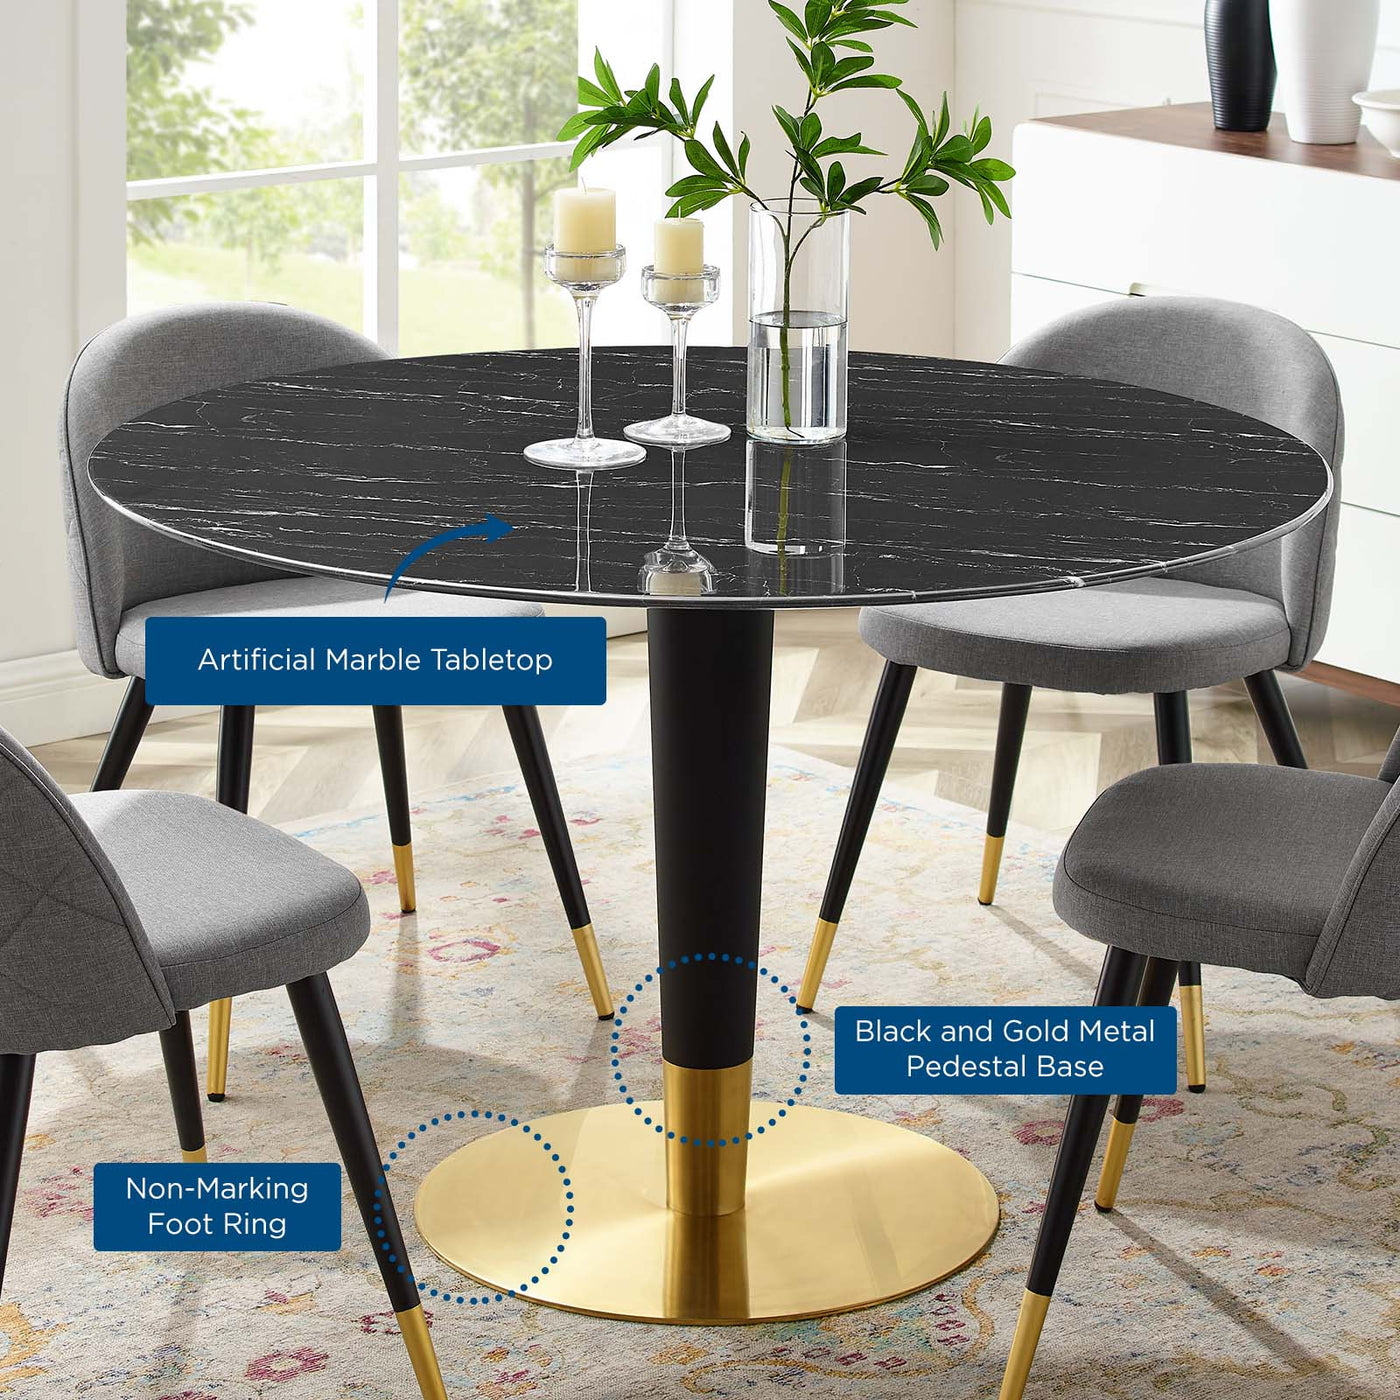 Zinque 47" Artificial Marble Dining Table